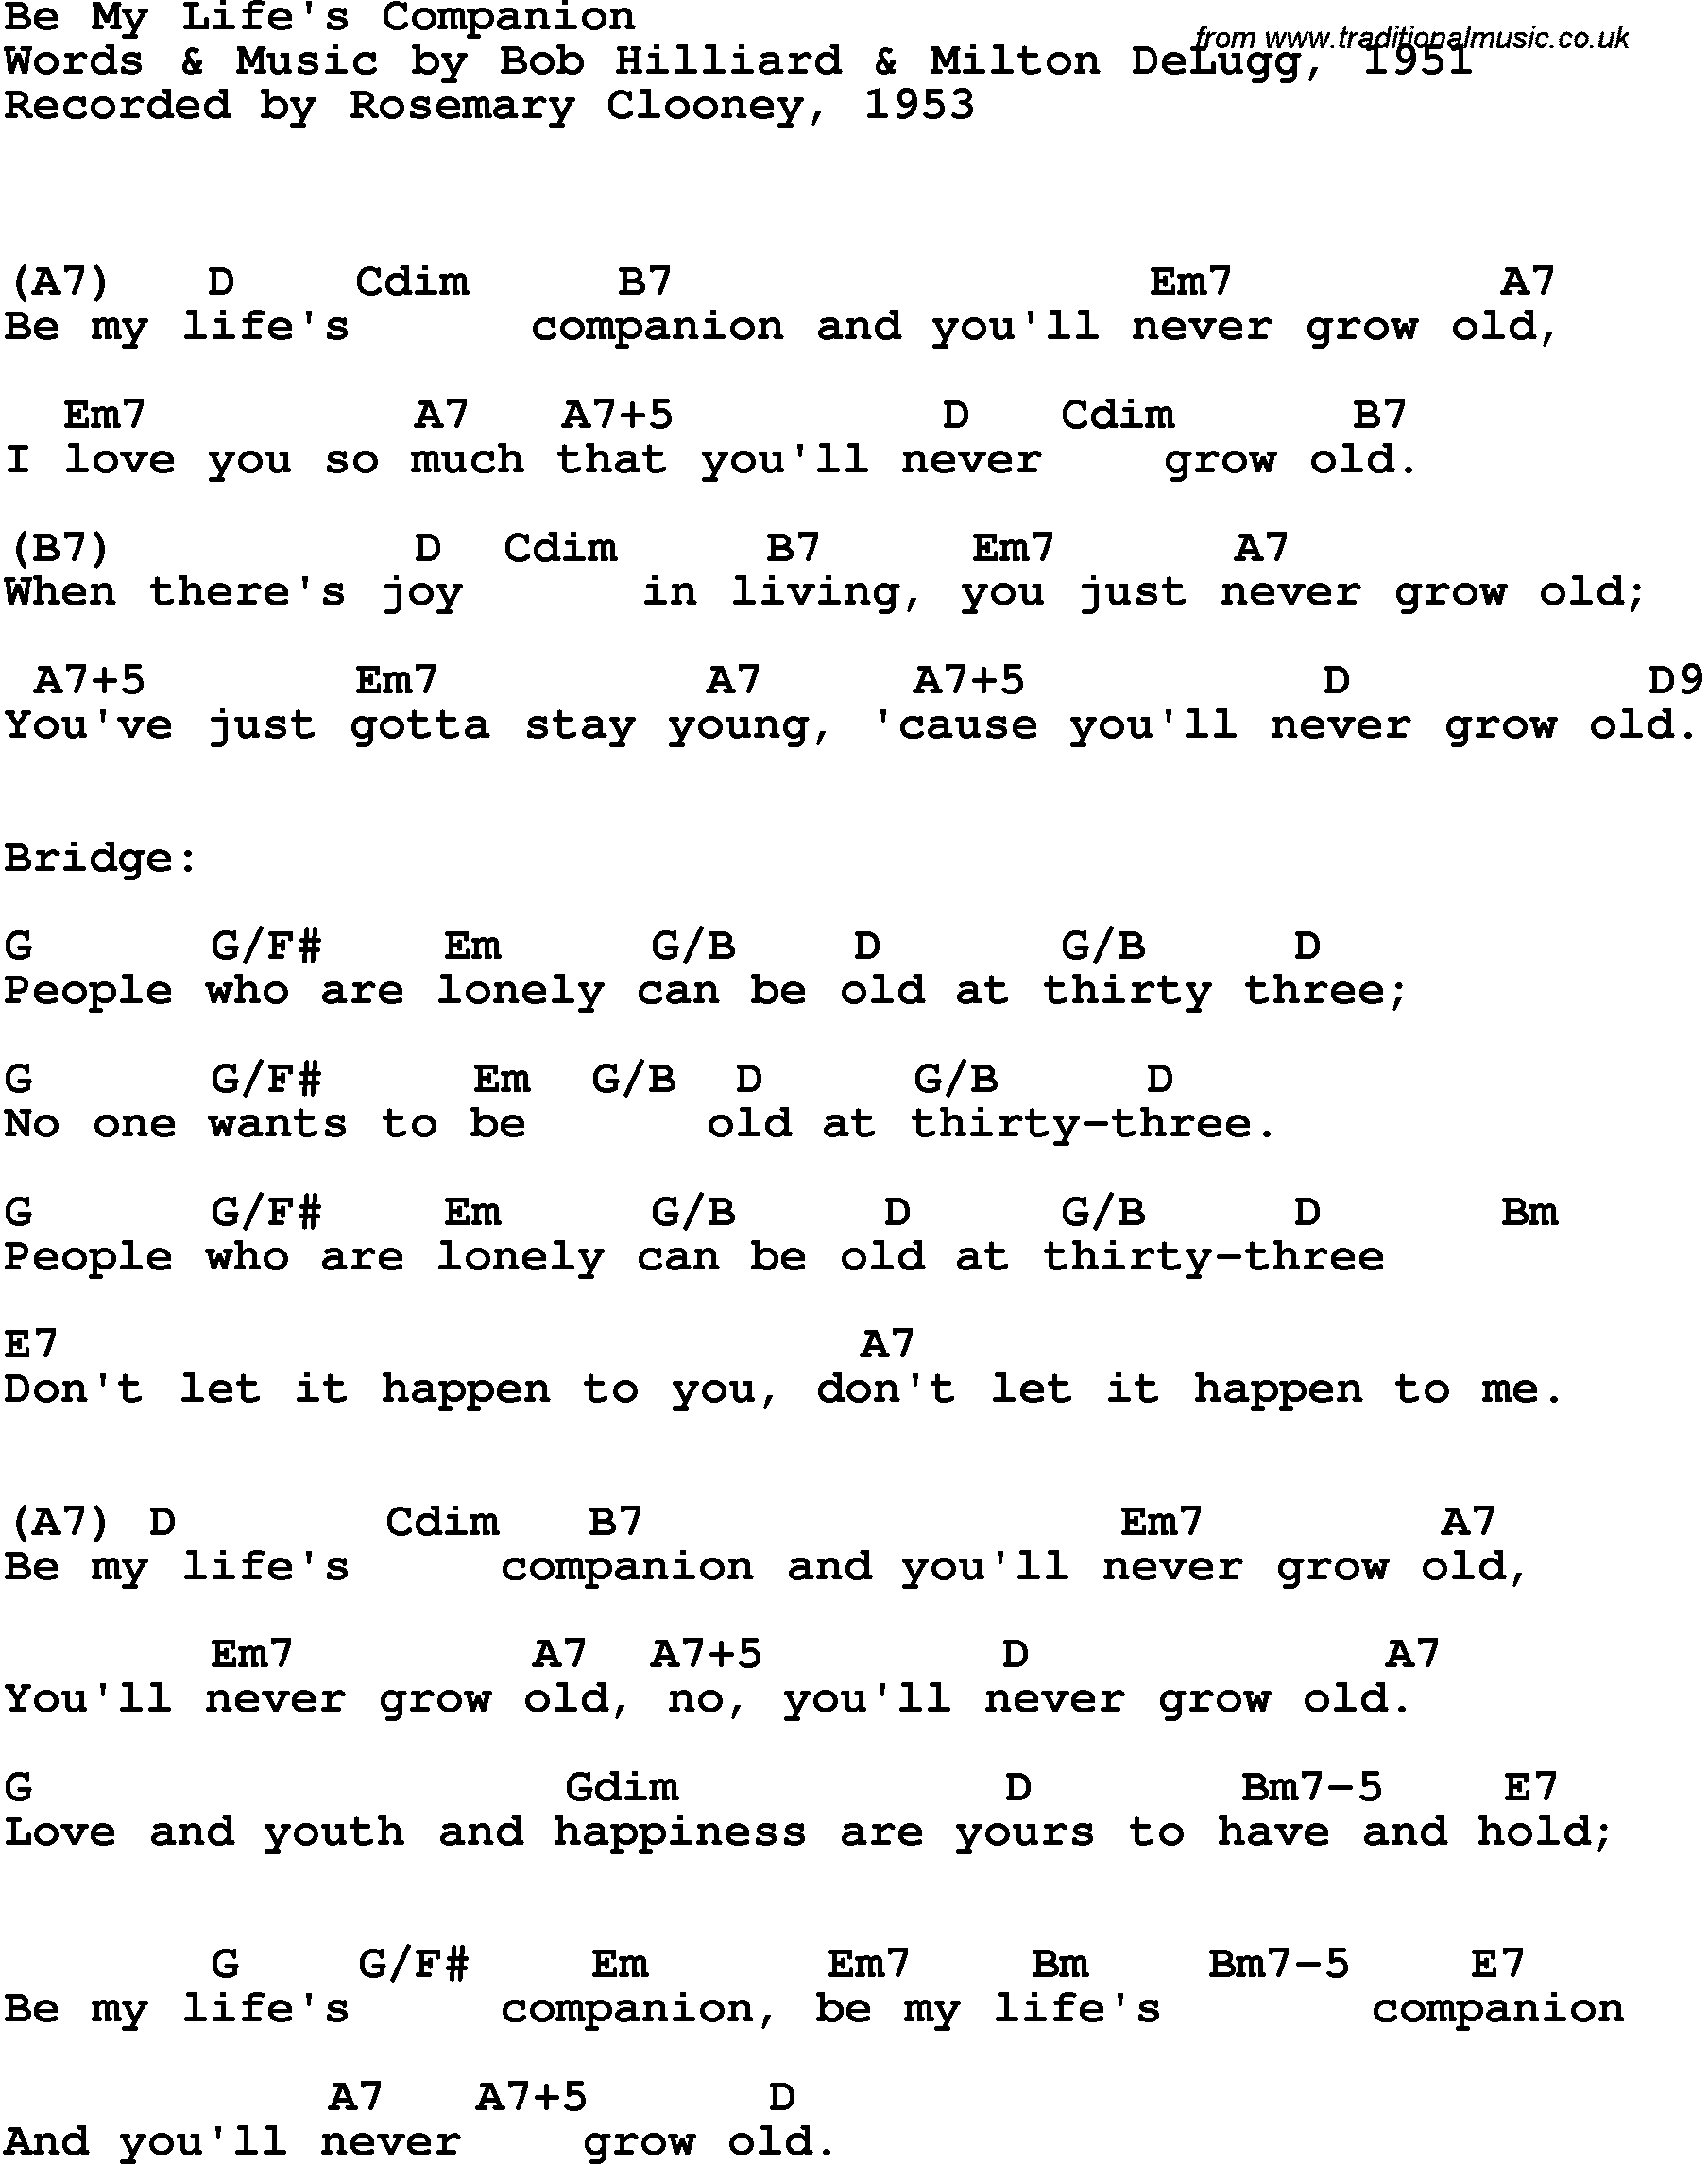 Song Lyrics with guitar chords for Be My Life's Companion - Rosemary Clooney, 1953